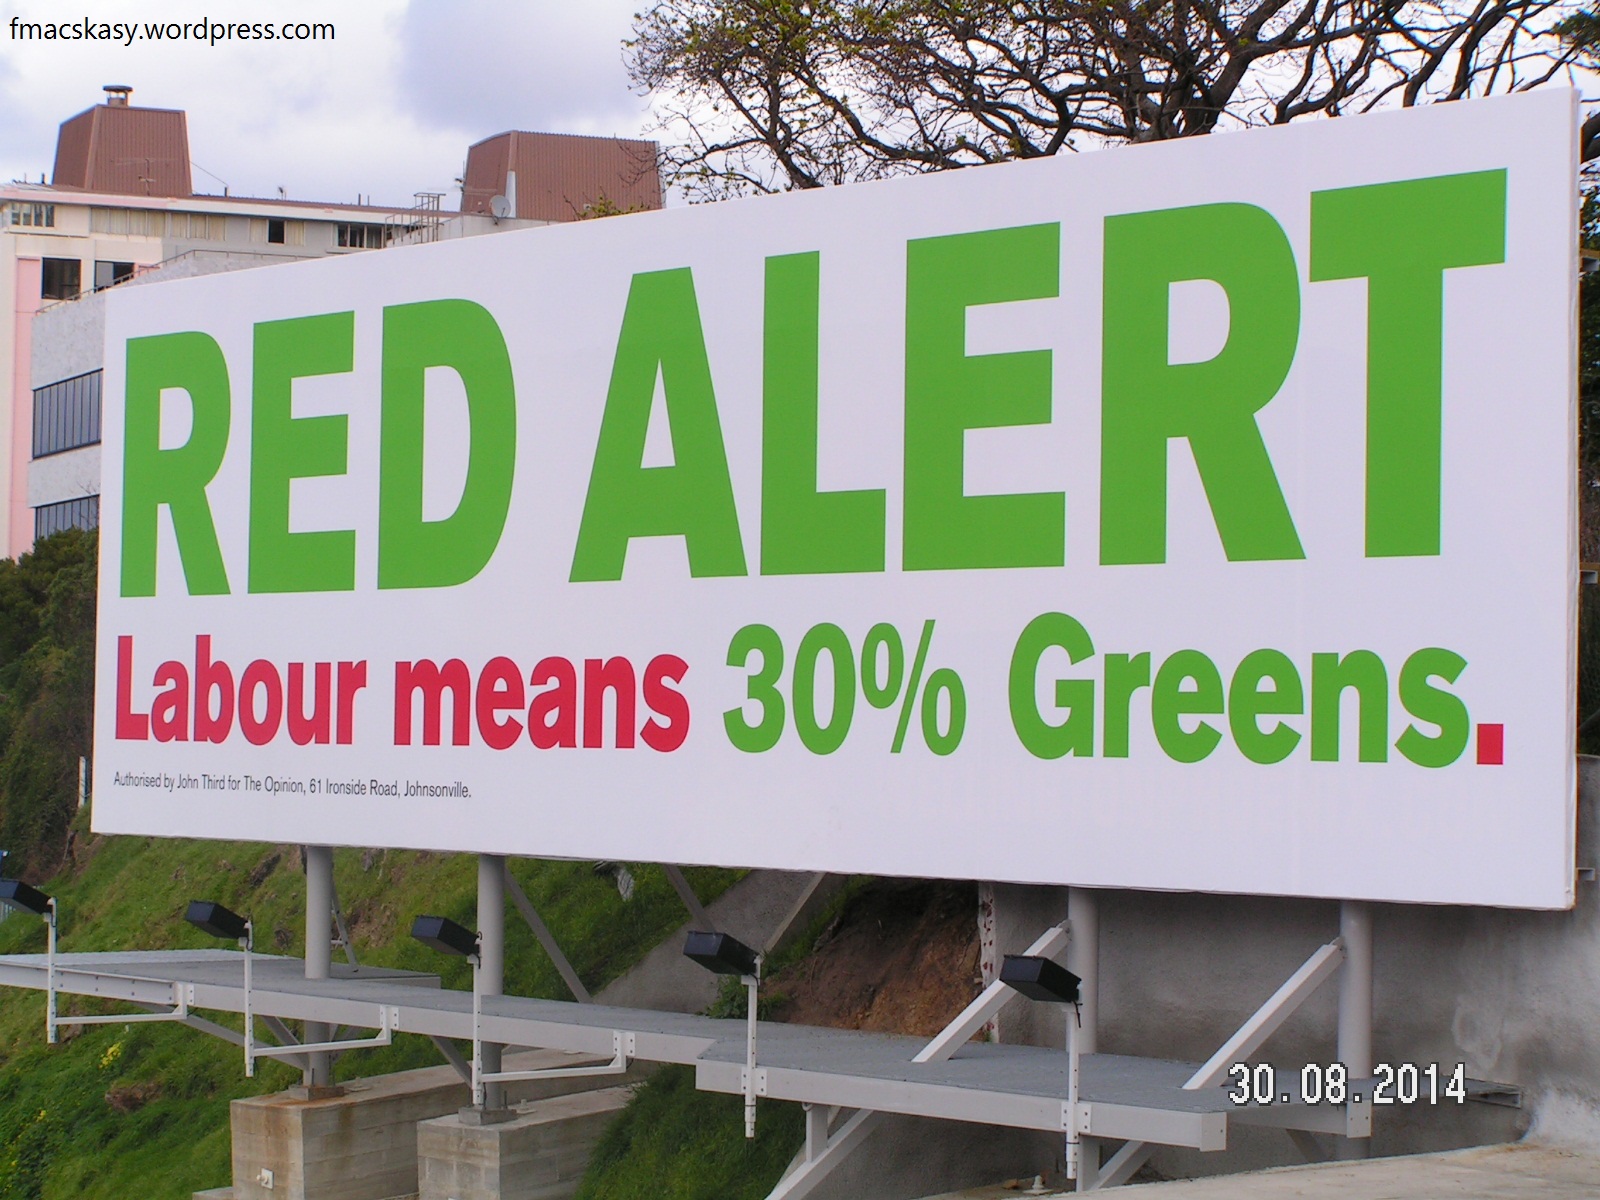 election billboards - hoardings - Greens - Labour - dirty politics